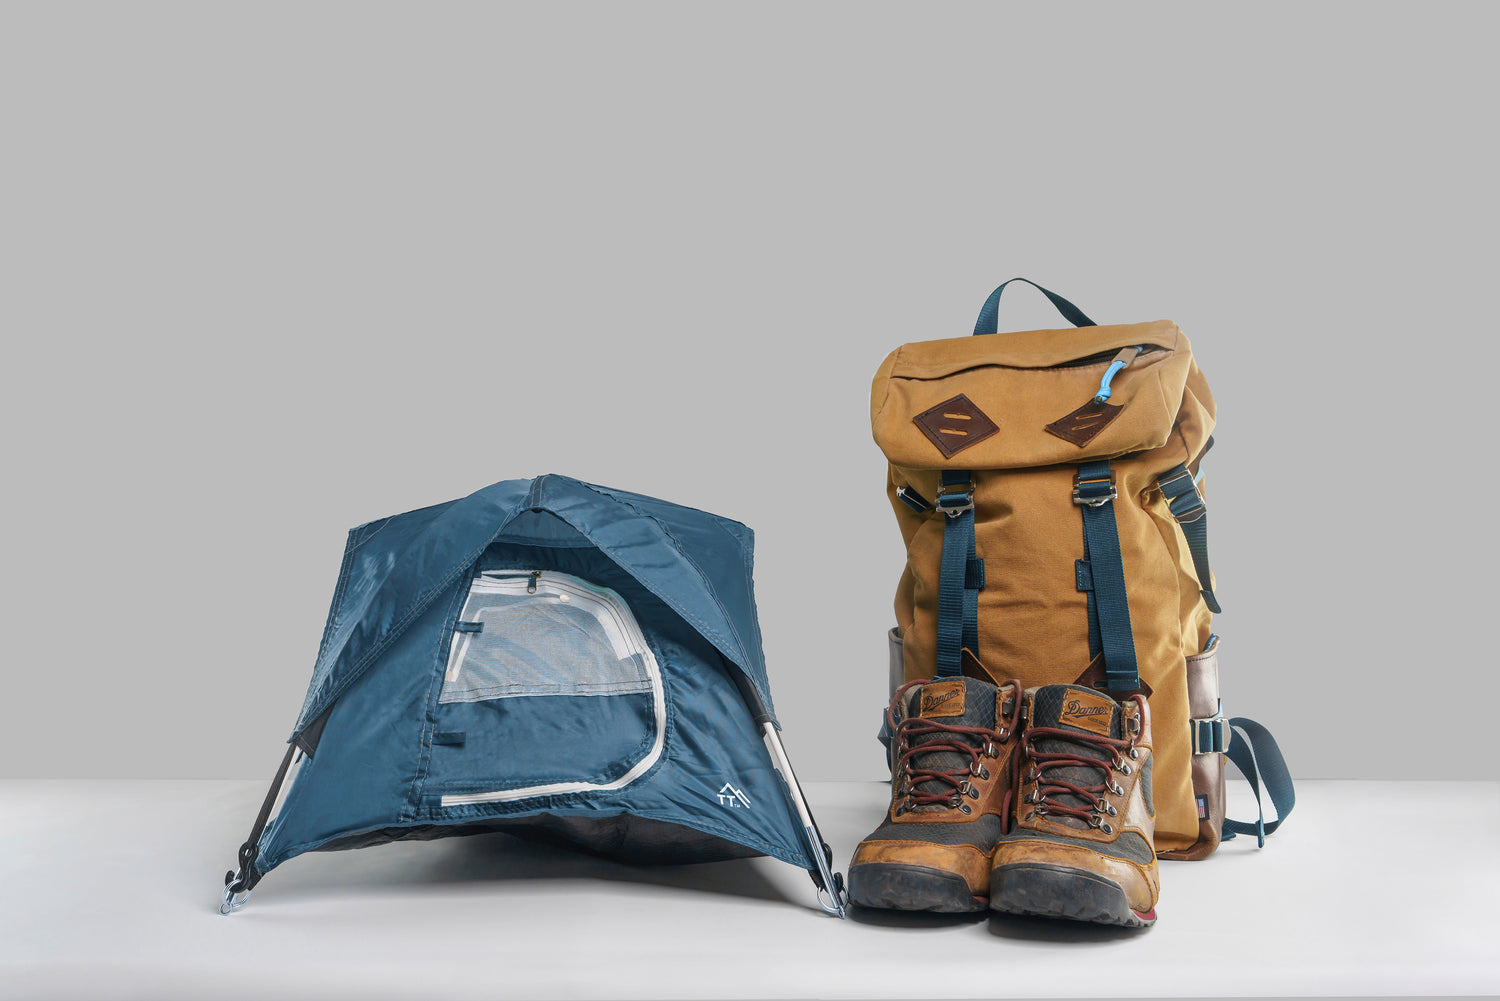 Blue Tiny Tent sitting next to hiking boots and a rucksack on gray background